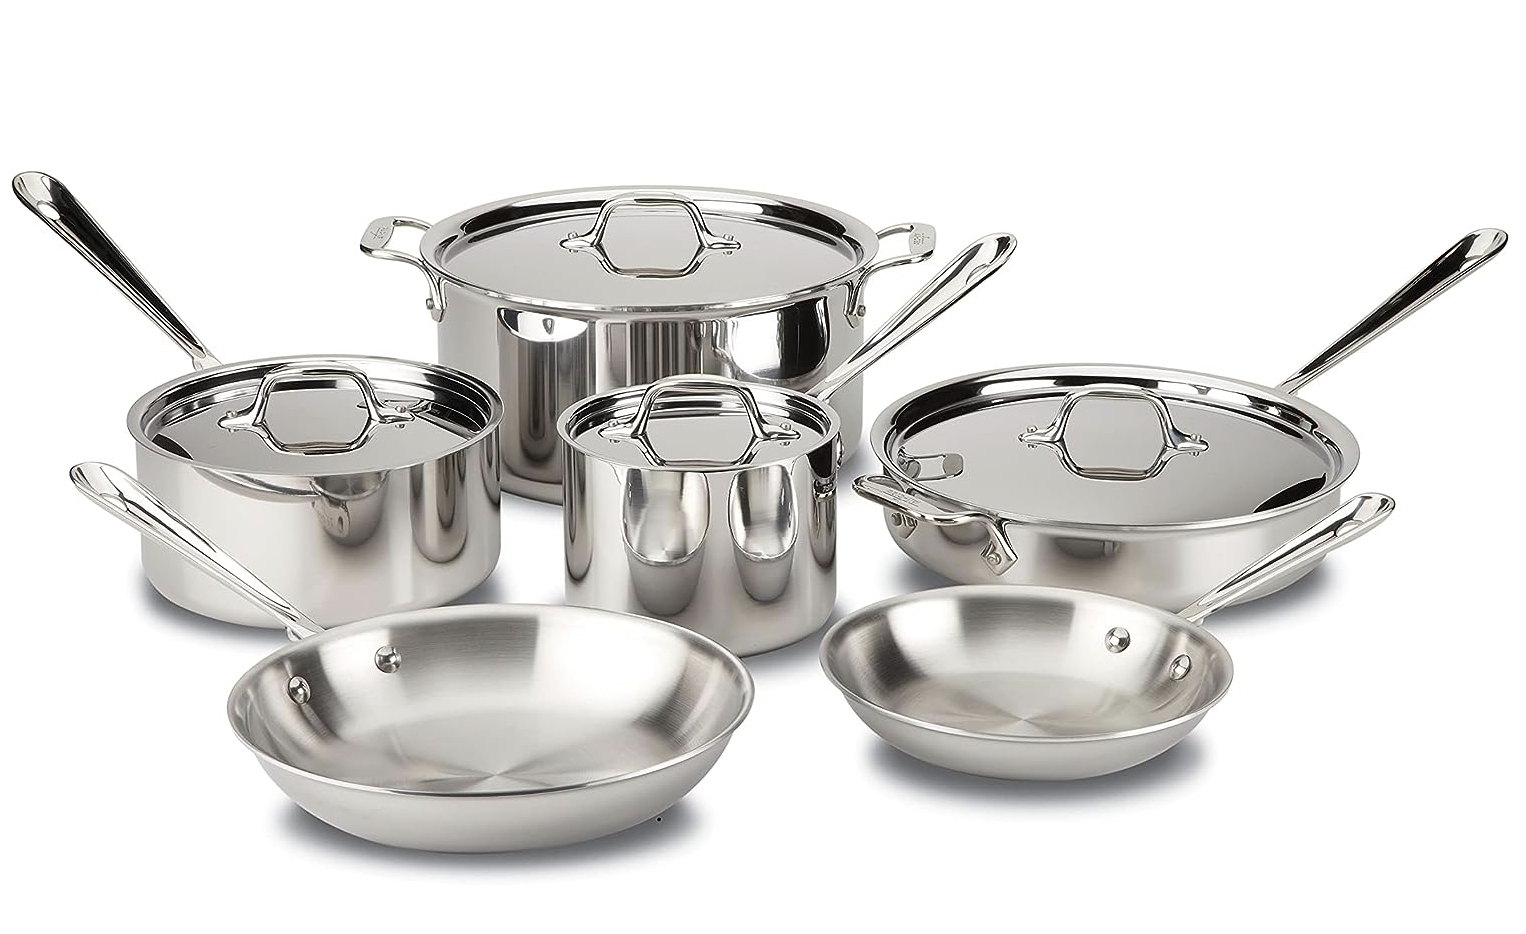 All-Clad cookware sale: Save up to 74% on All-Clad pots and pans